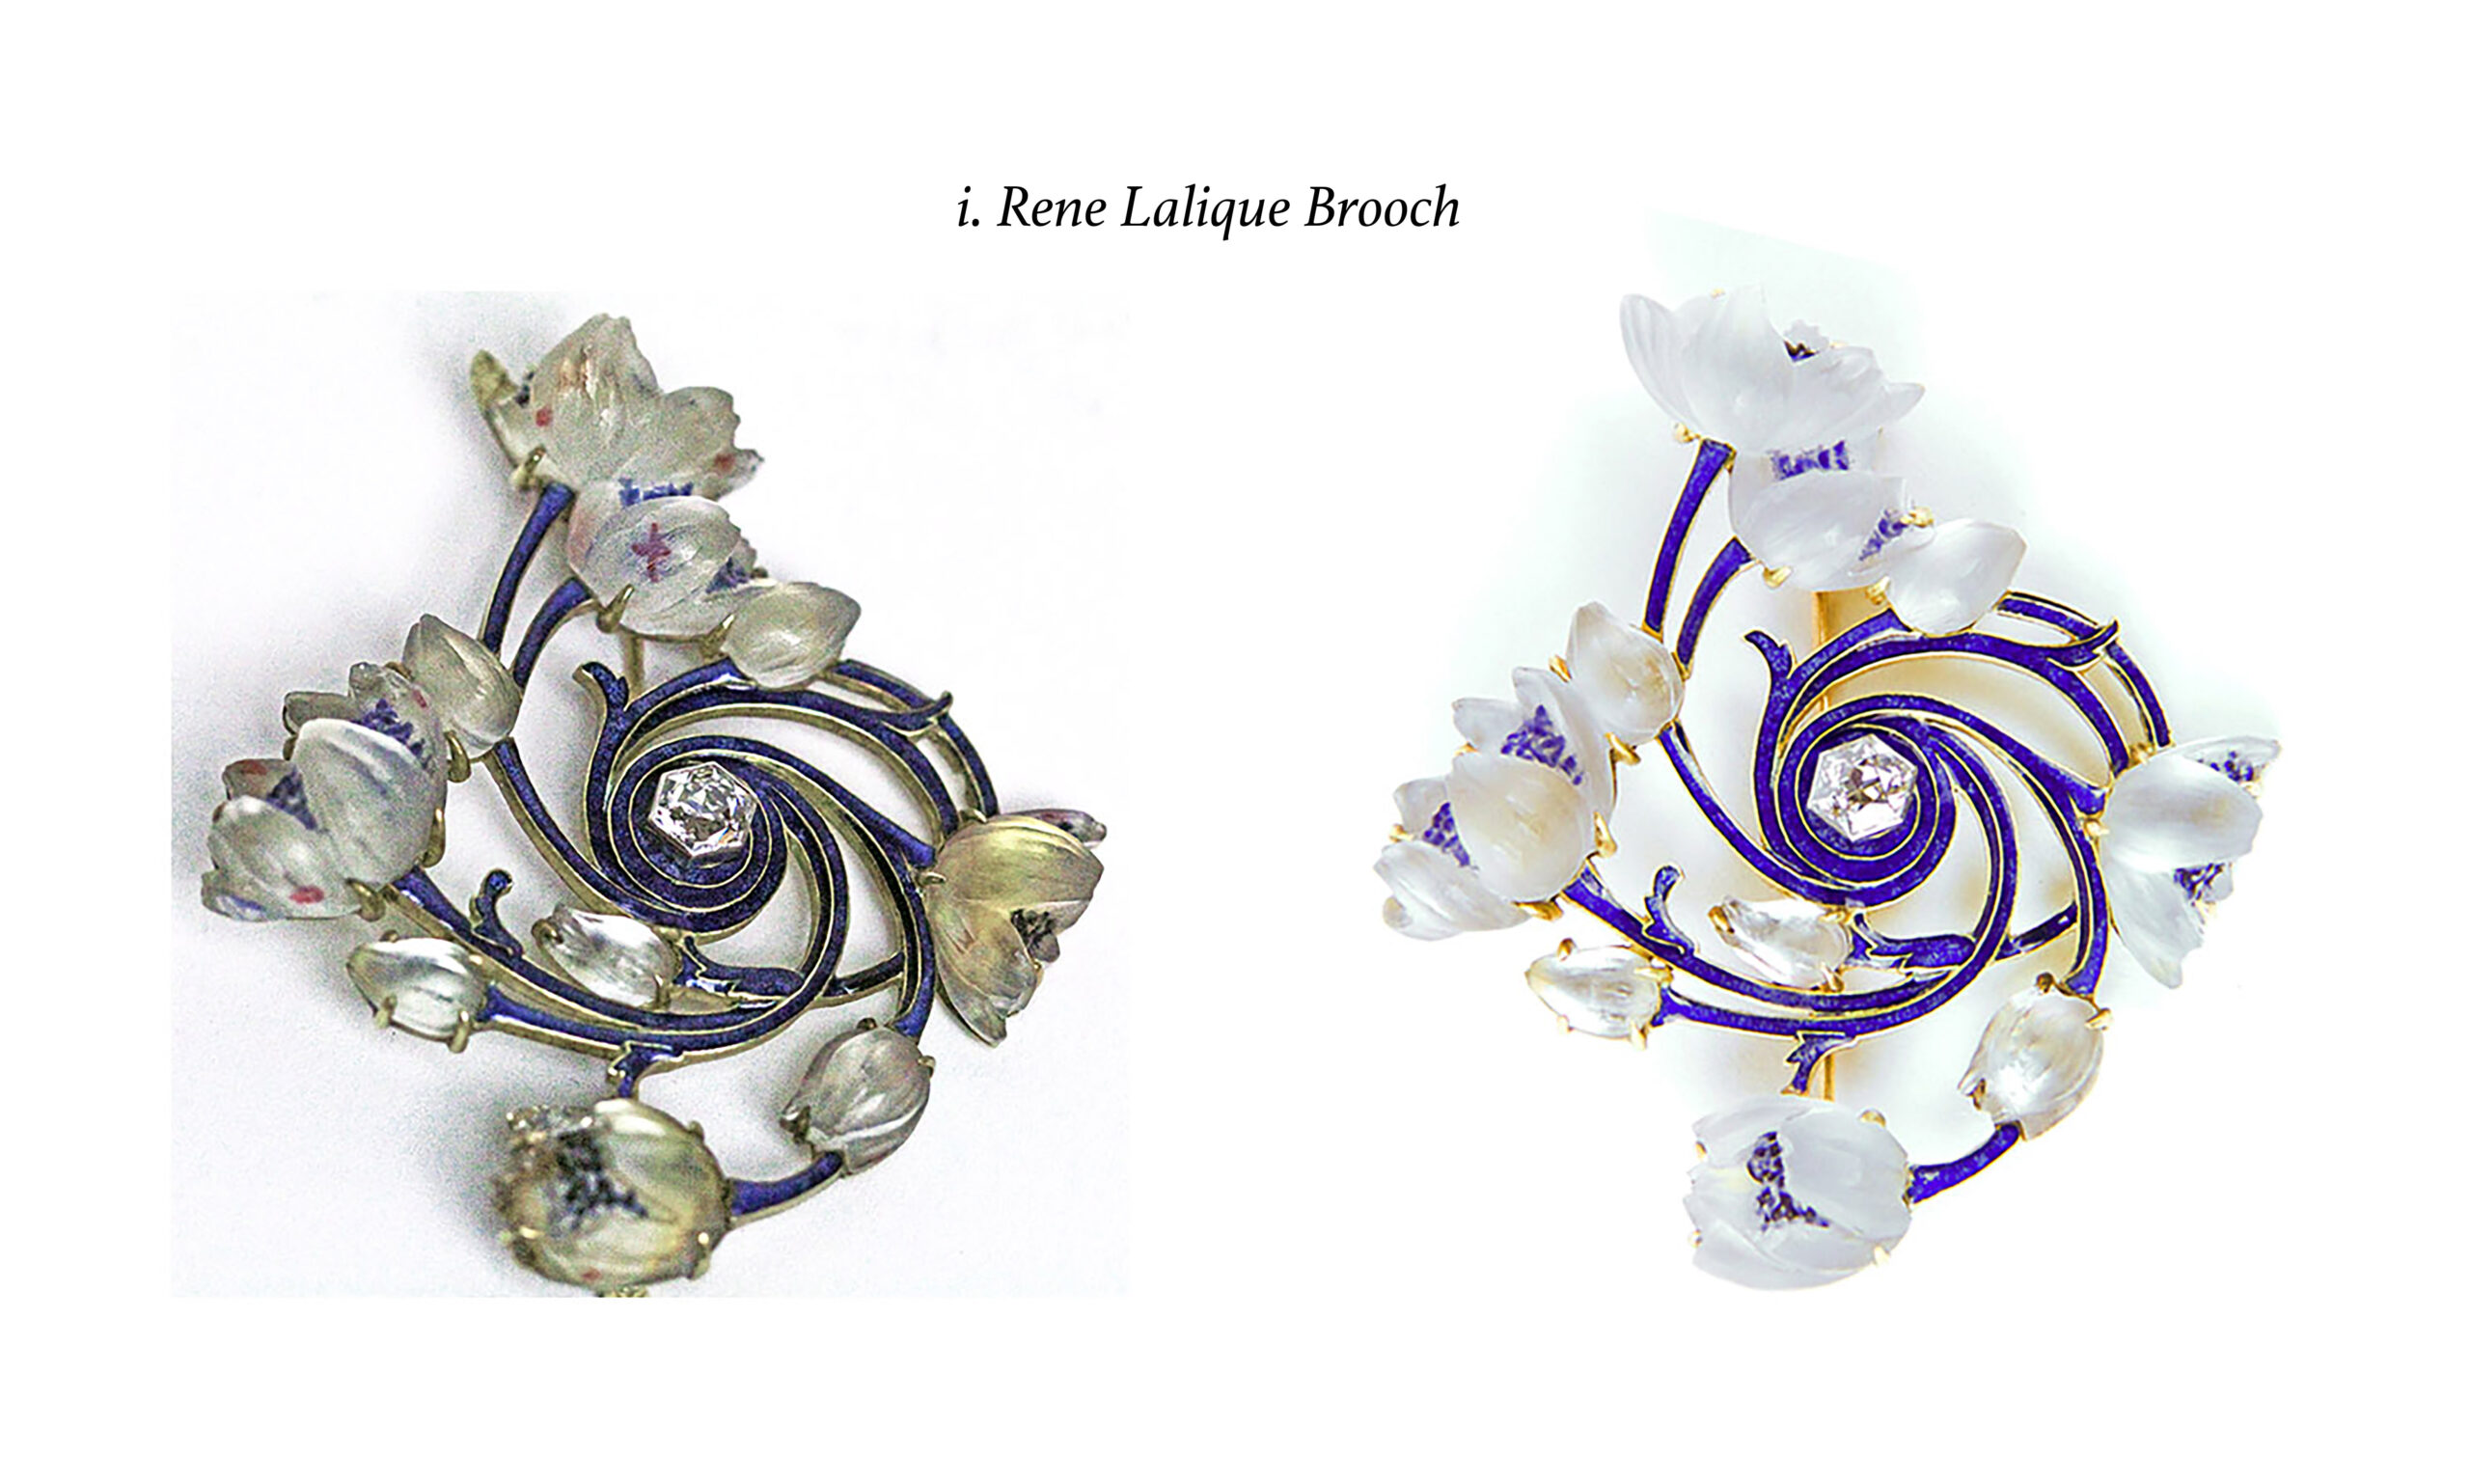 Two images of a brooch with flowers and swirls.